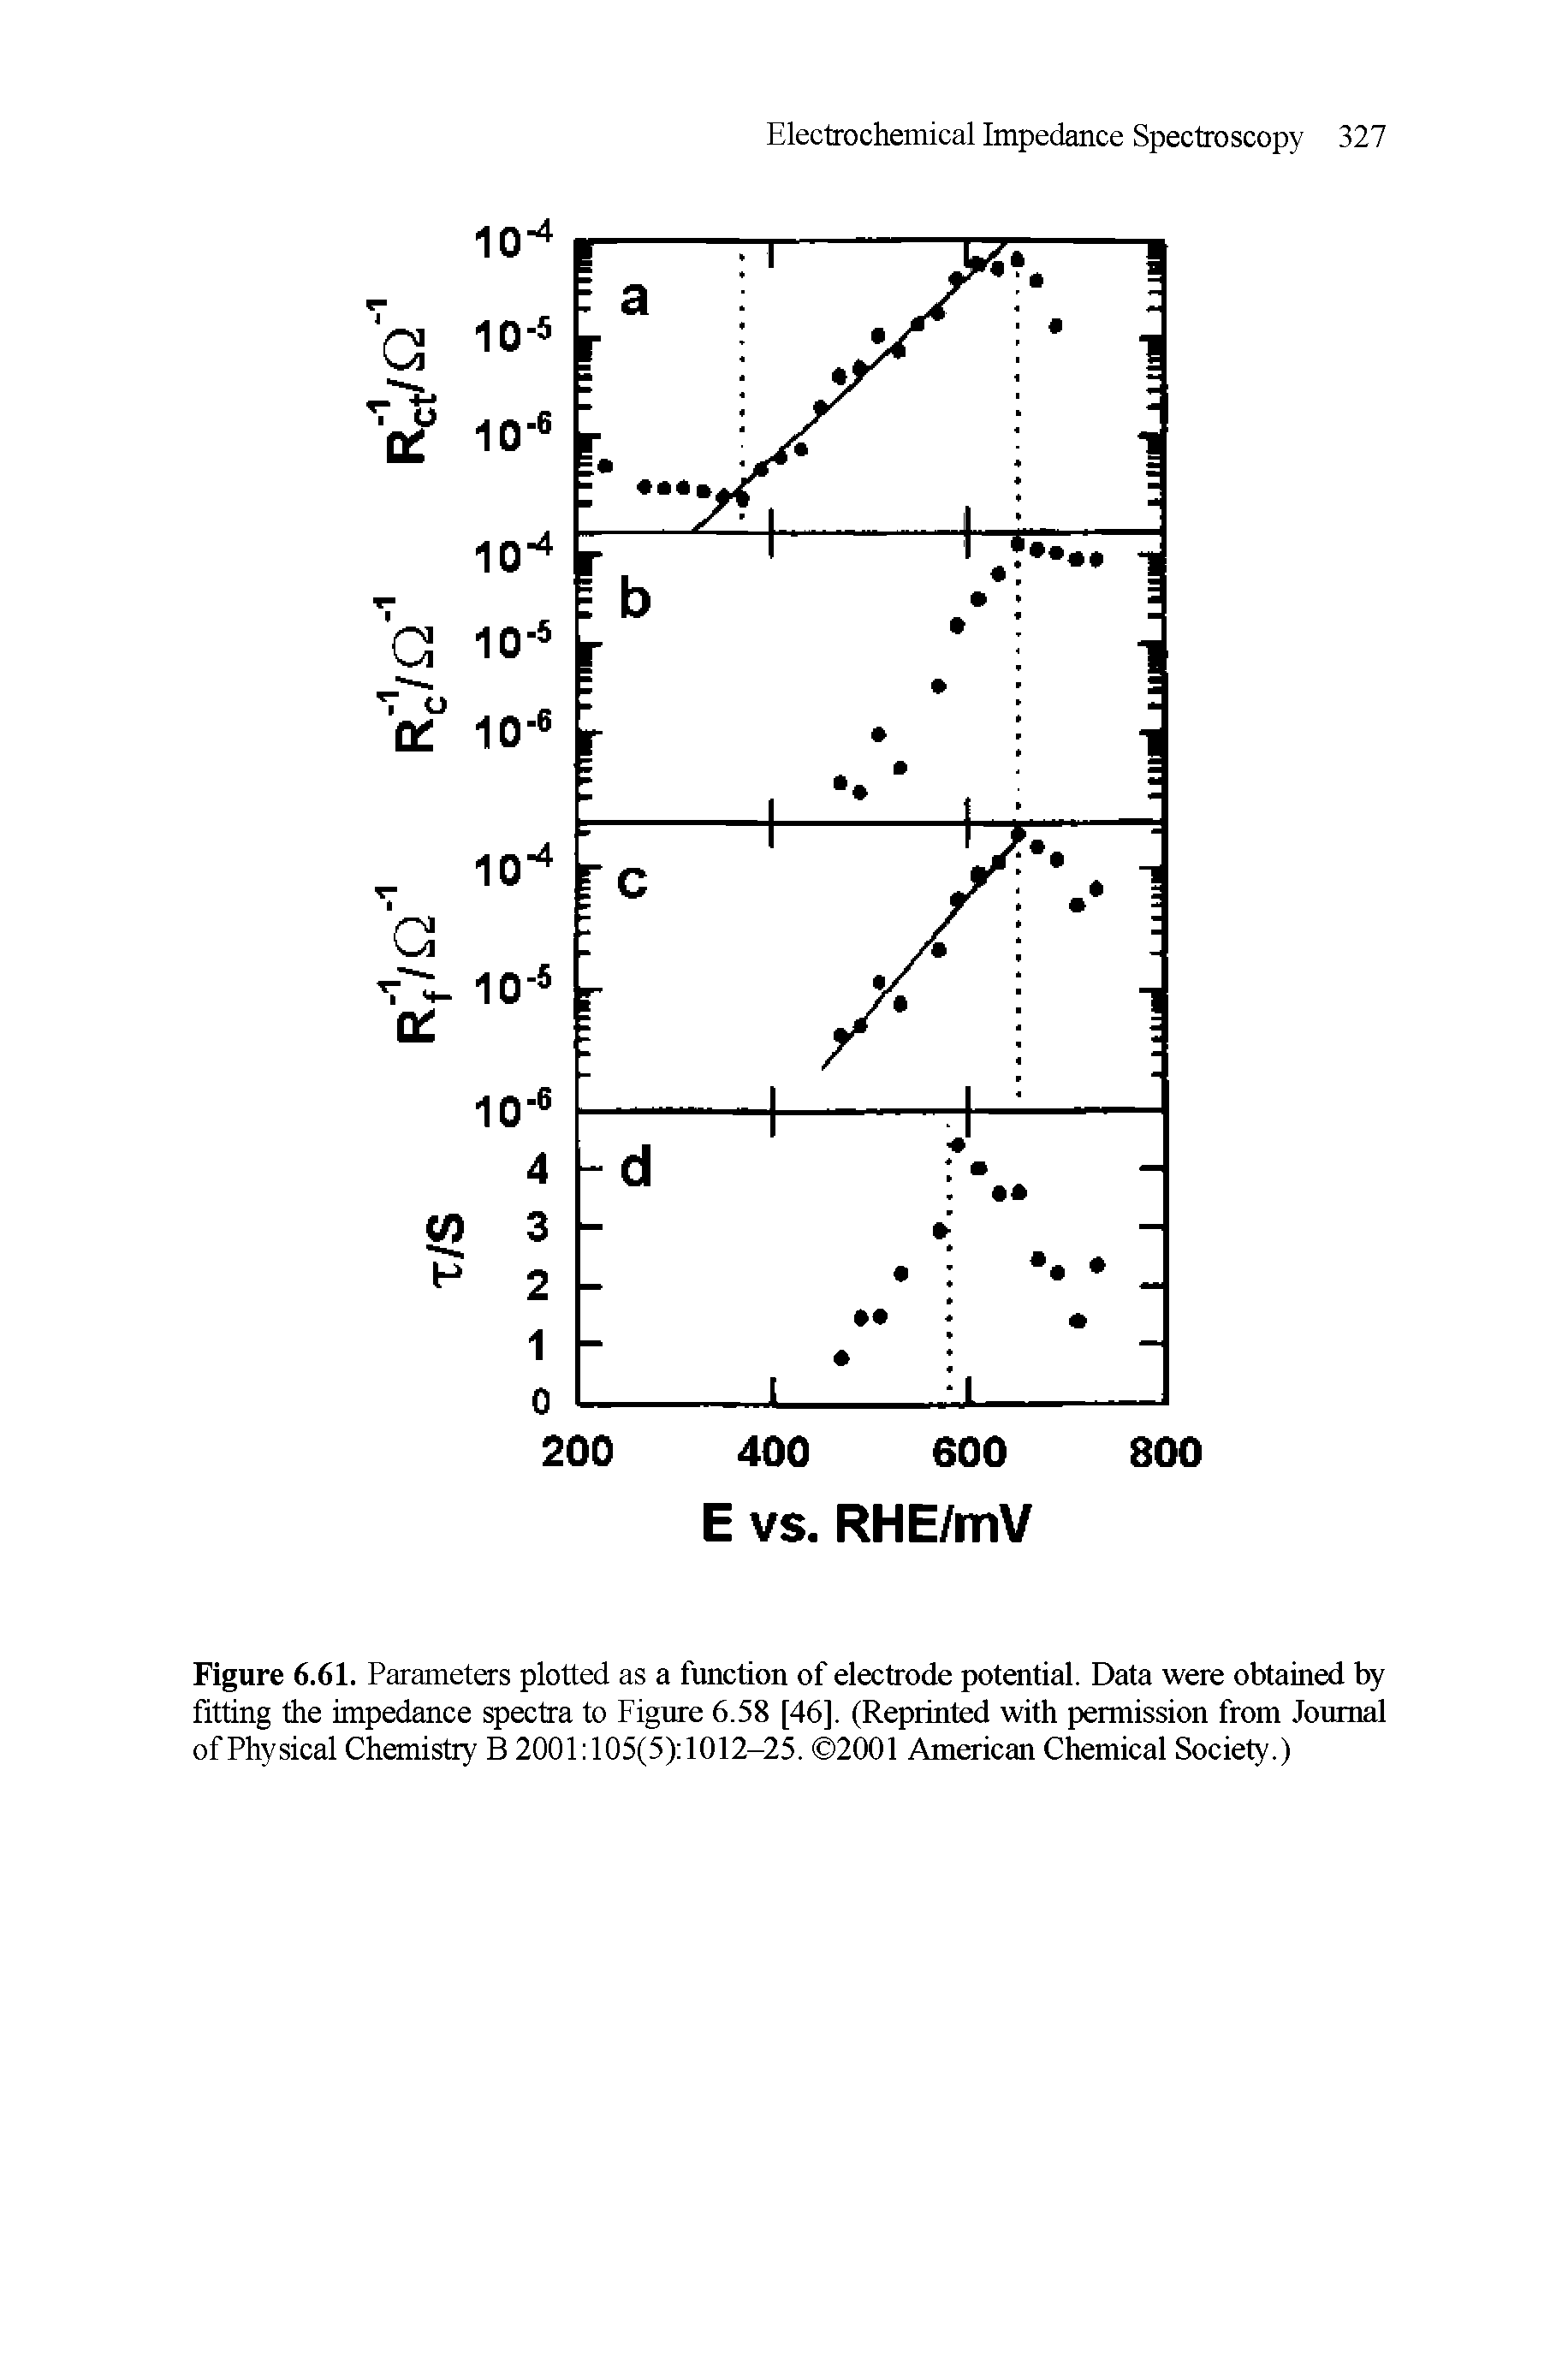 Figure 6.61. Parameters plotted as a function of electrode potential. Data were obtained by fitting the impedance spectra to Figure 6.58 [46]. (Reprinted with permission from Journal of Physical Chemistry B 2001 105(5) 1012-25. 2001 American Chemical Society.)...